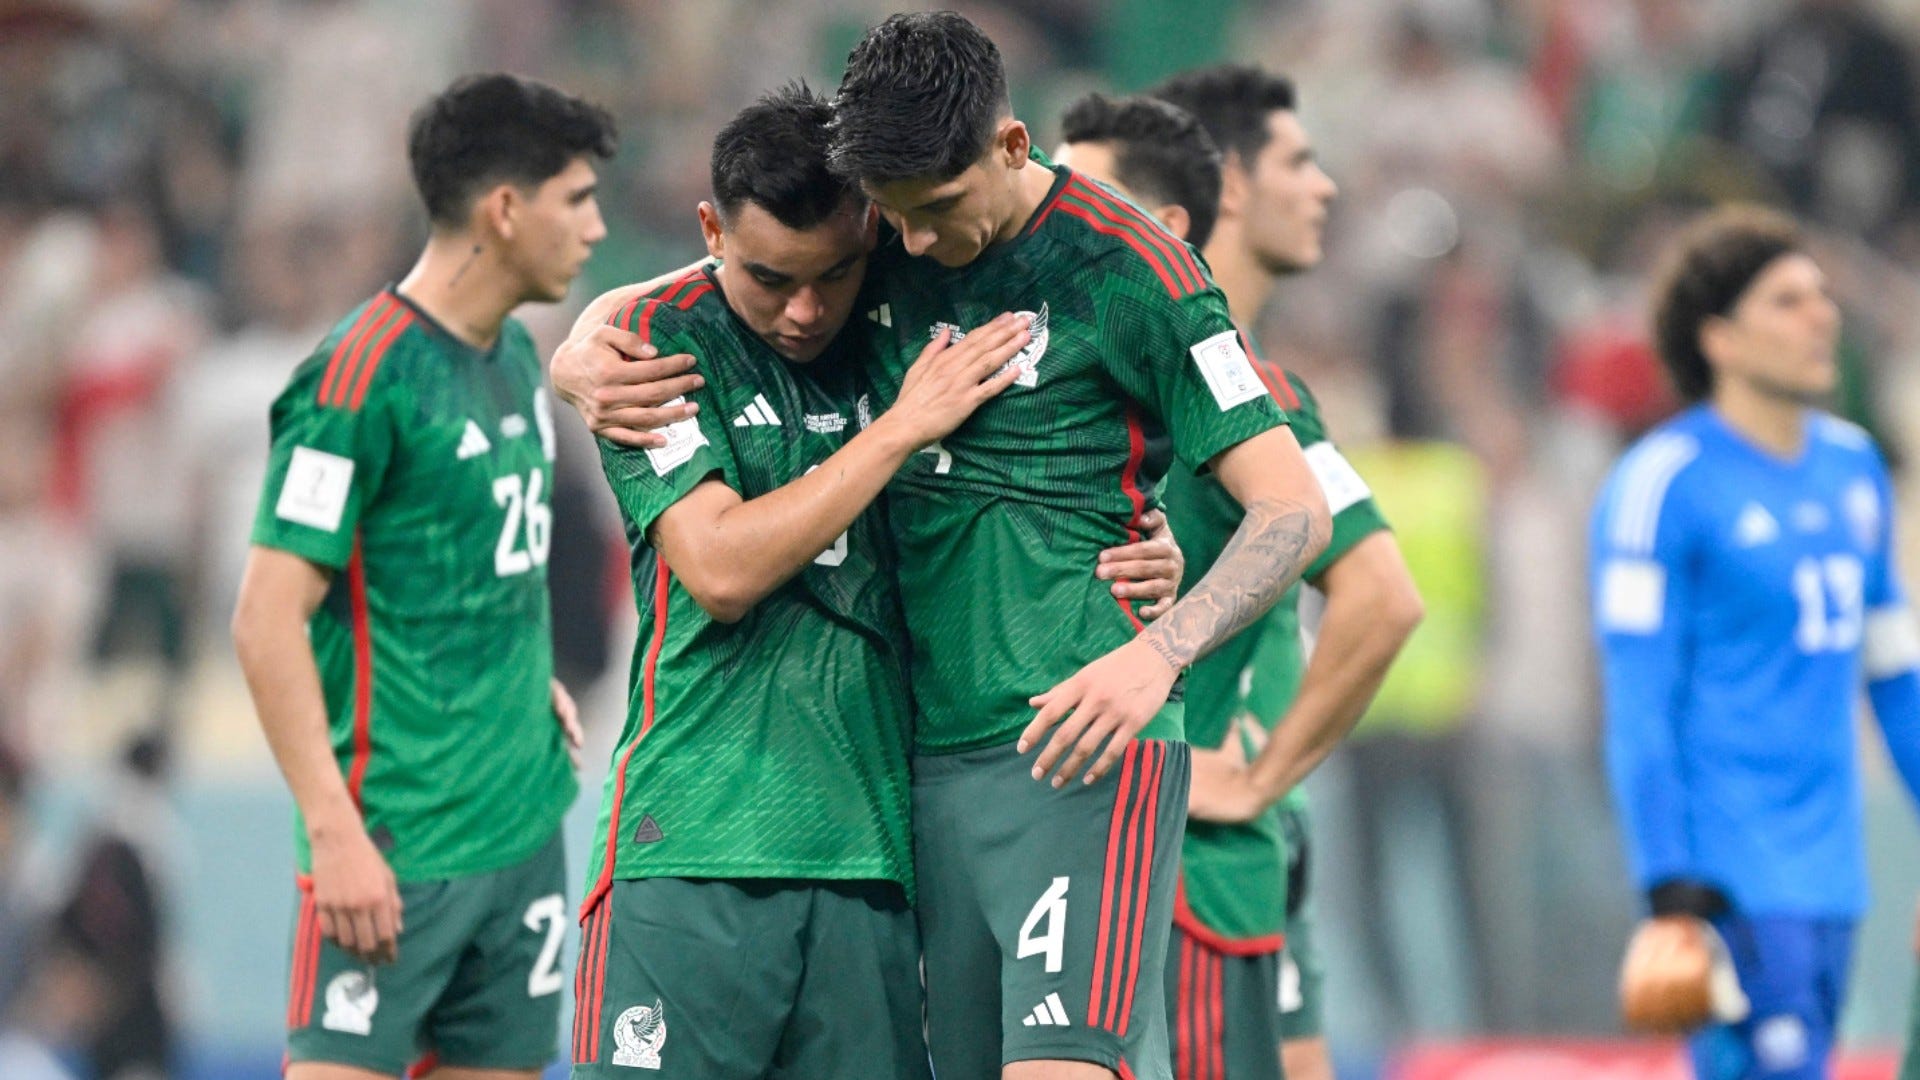 Mexico World Cup 2022